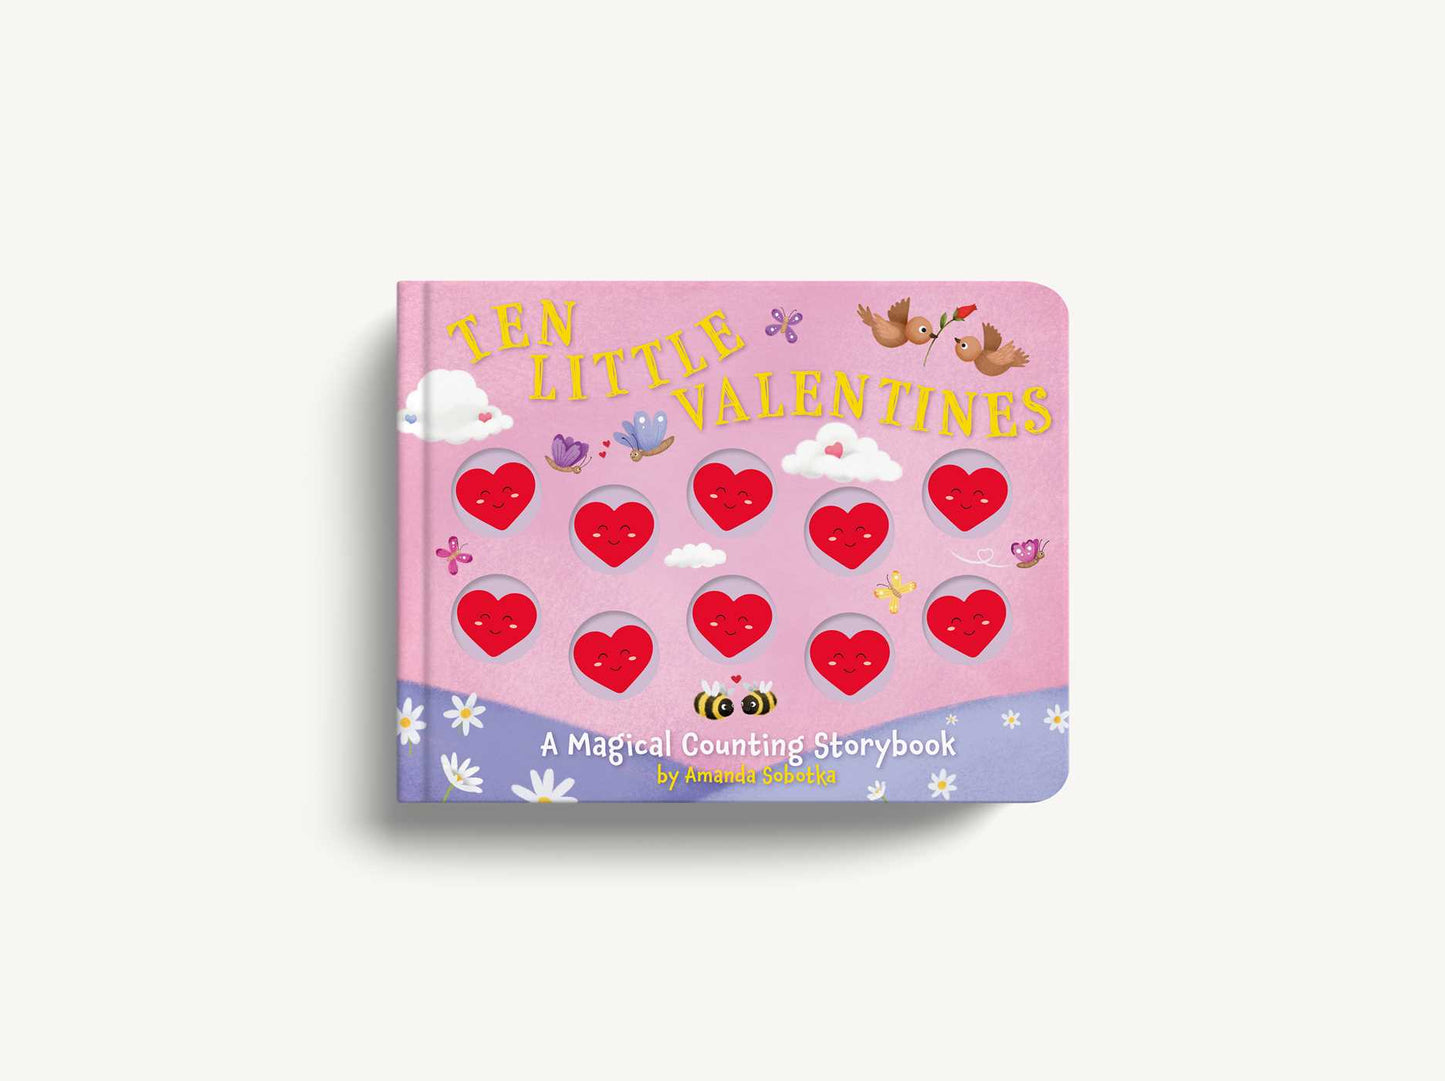 Ten Little Valentines: A Magical Counting Storybook of Love